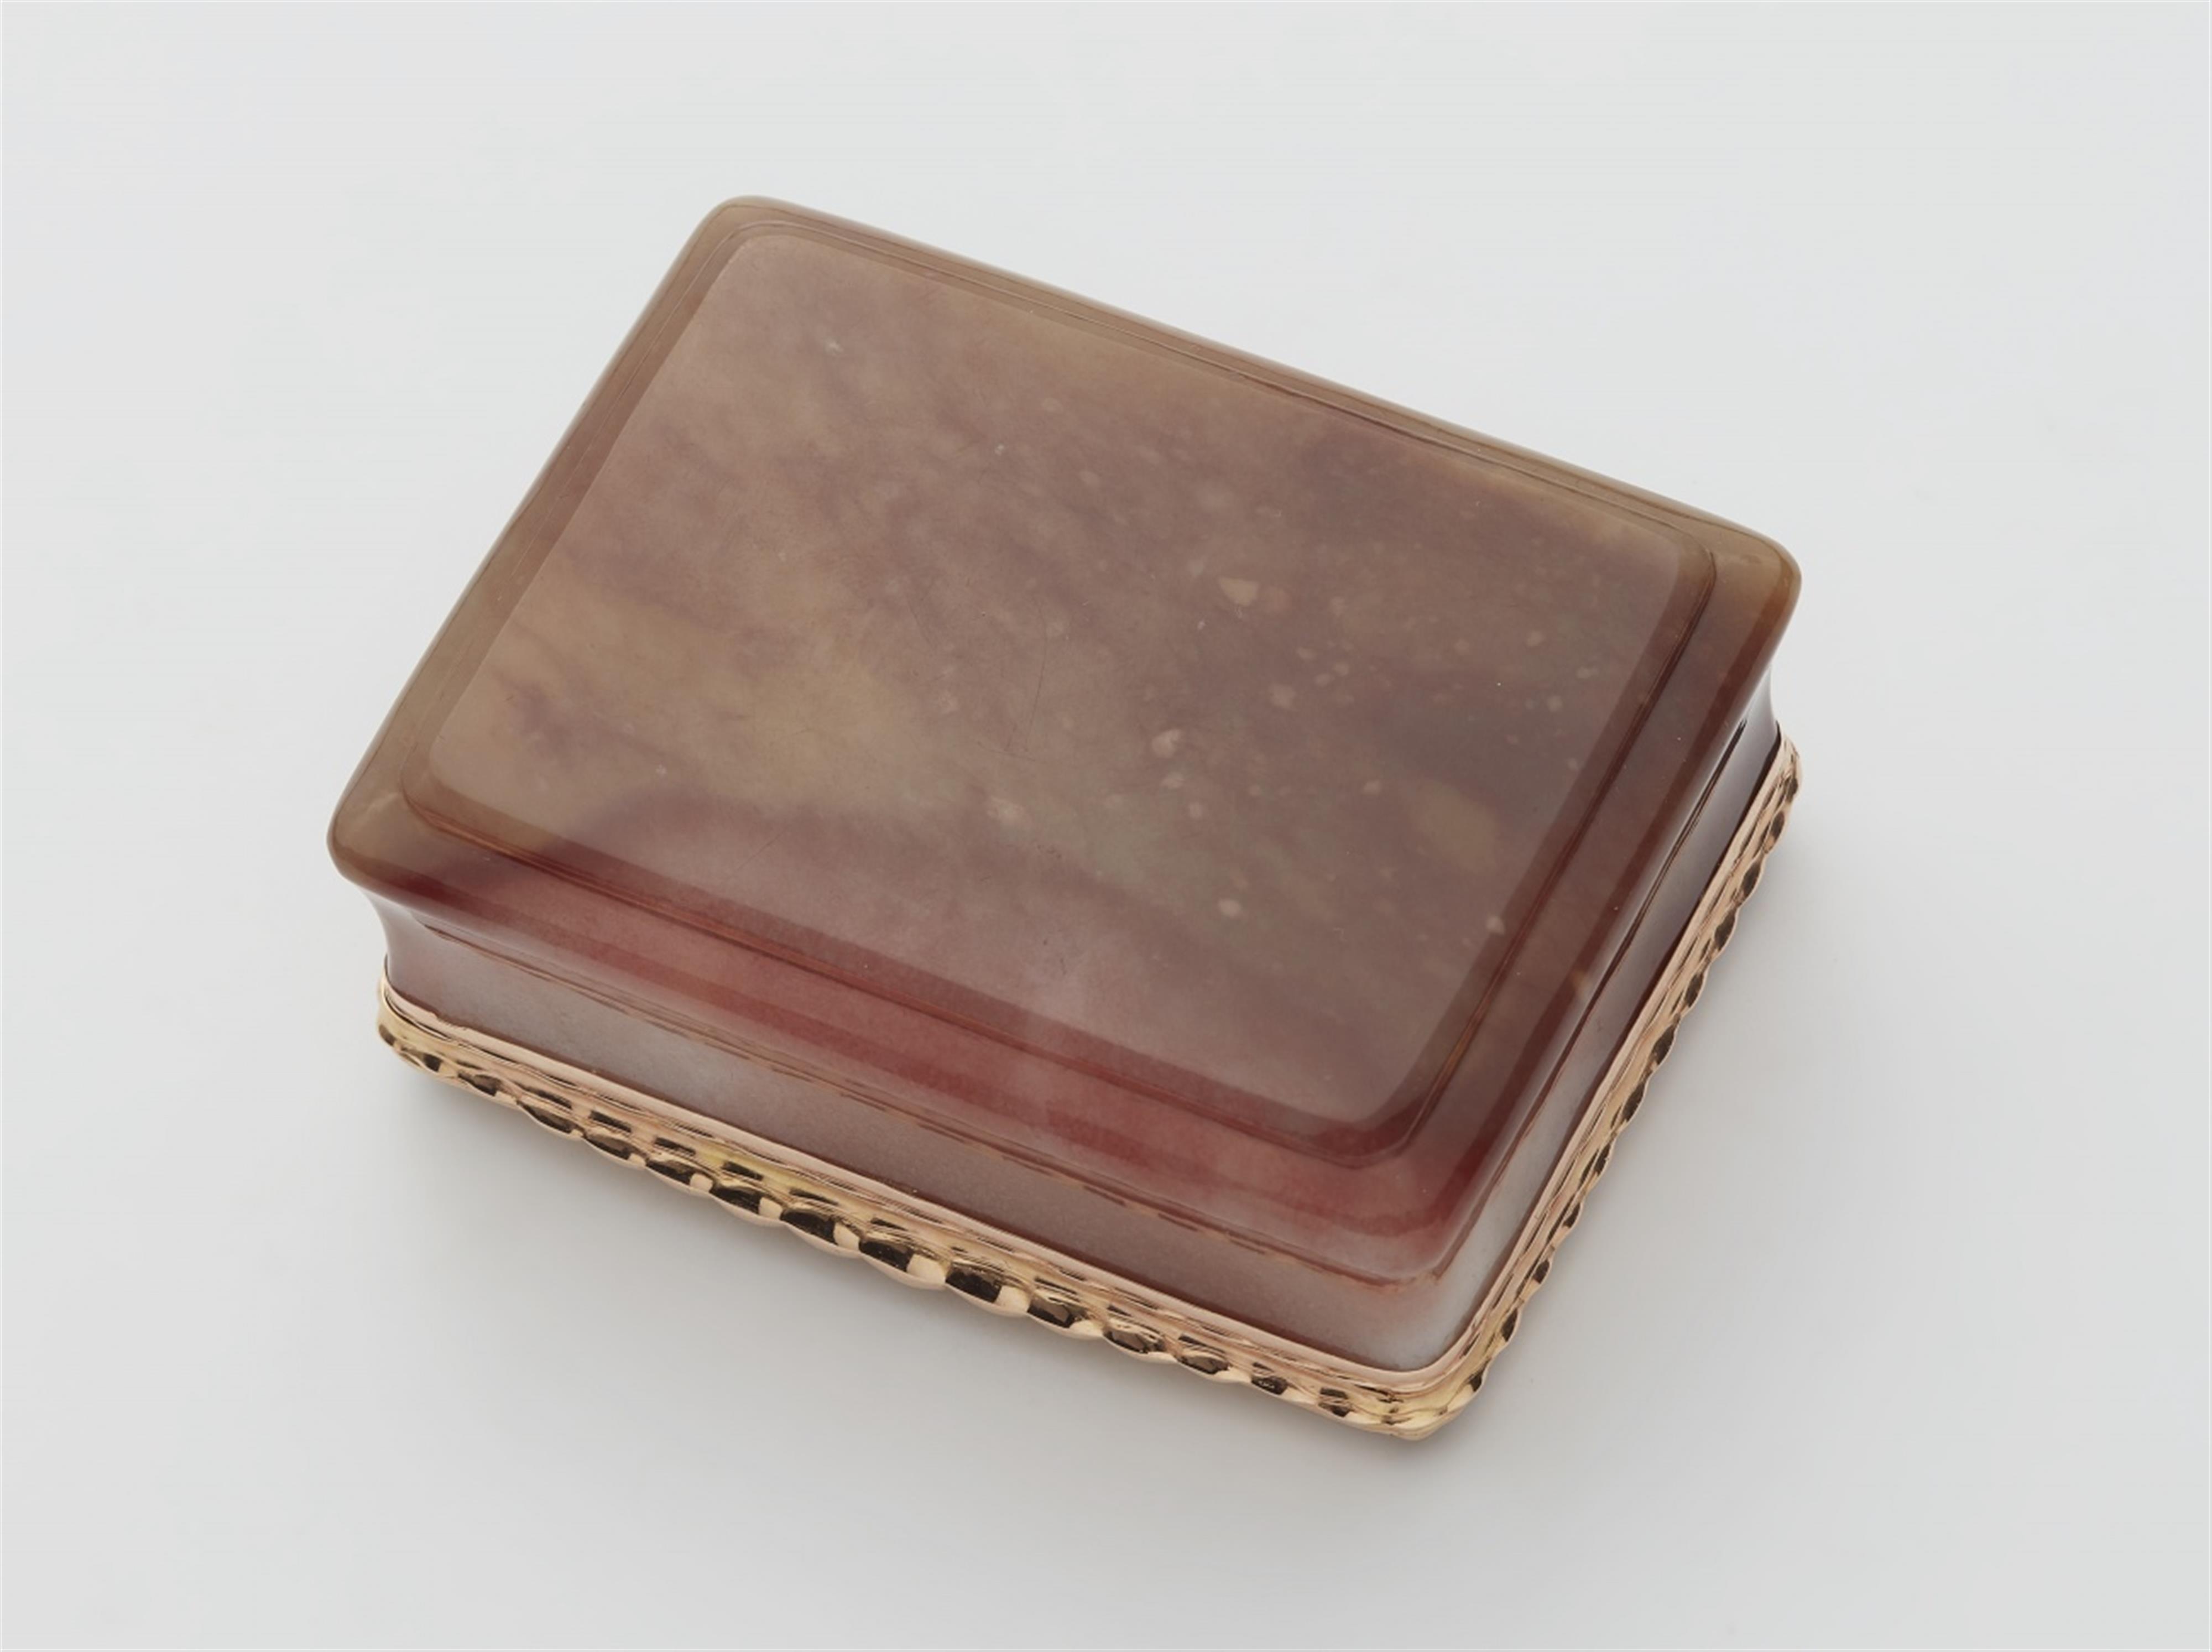 A 14k gold mounted agate box with a cameo portrait - image-2